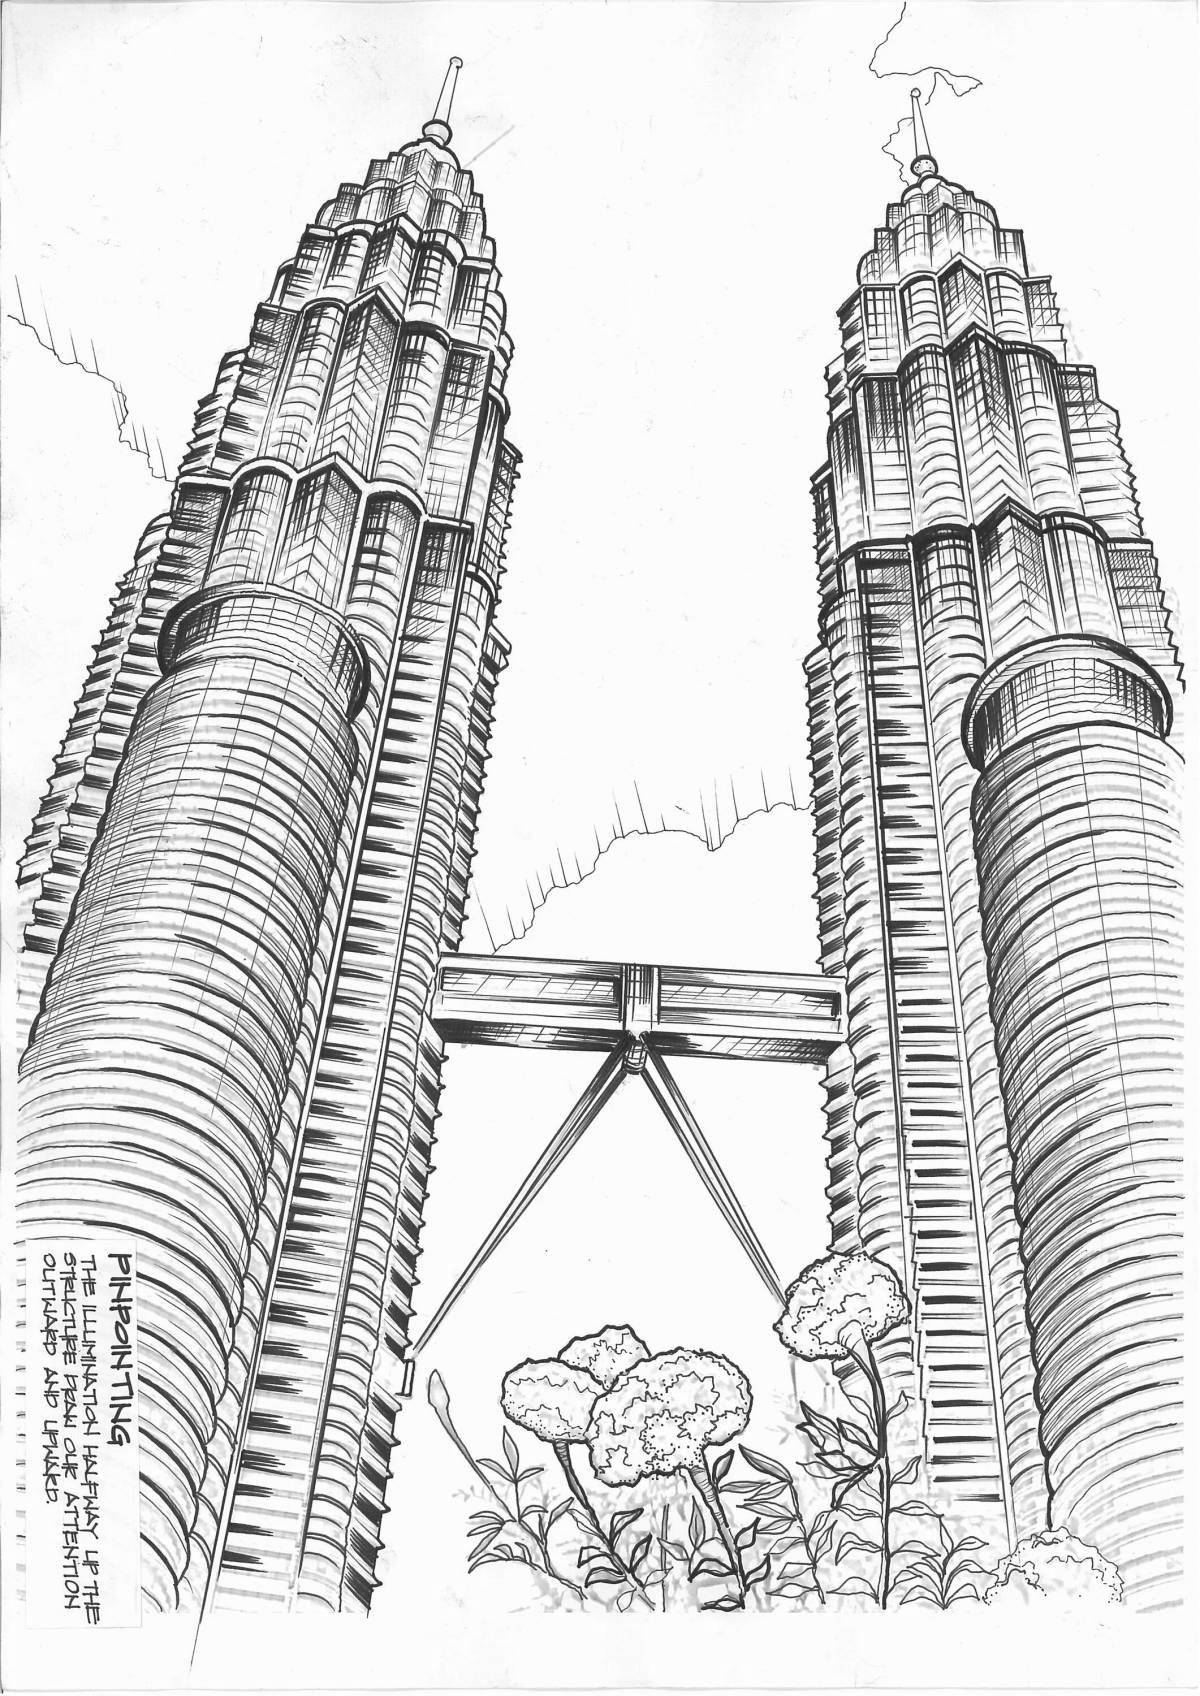 Charming skyscraper coloring page